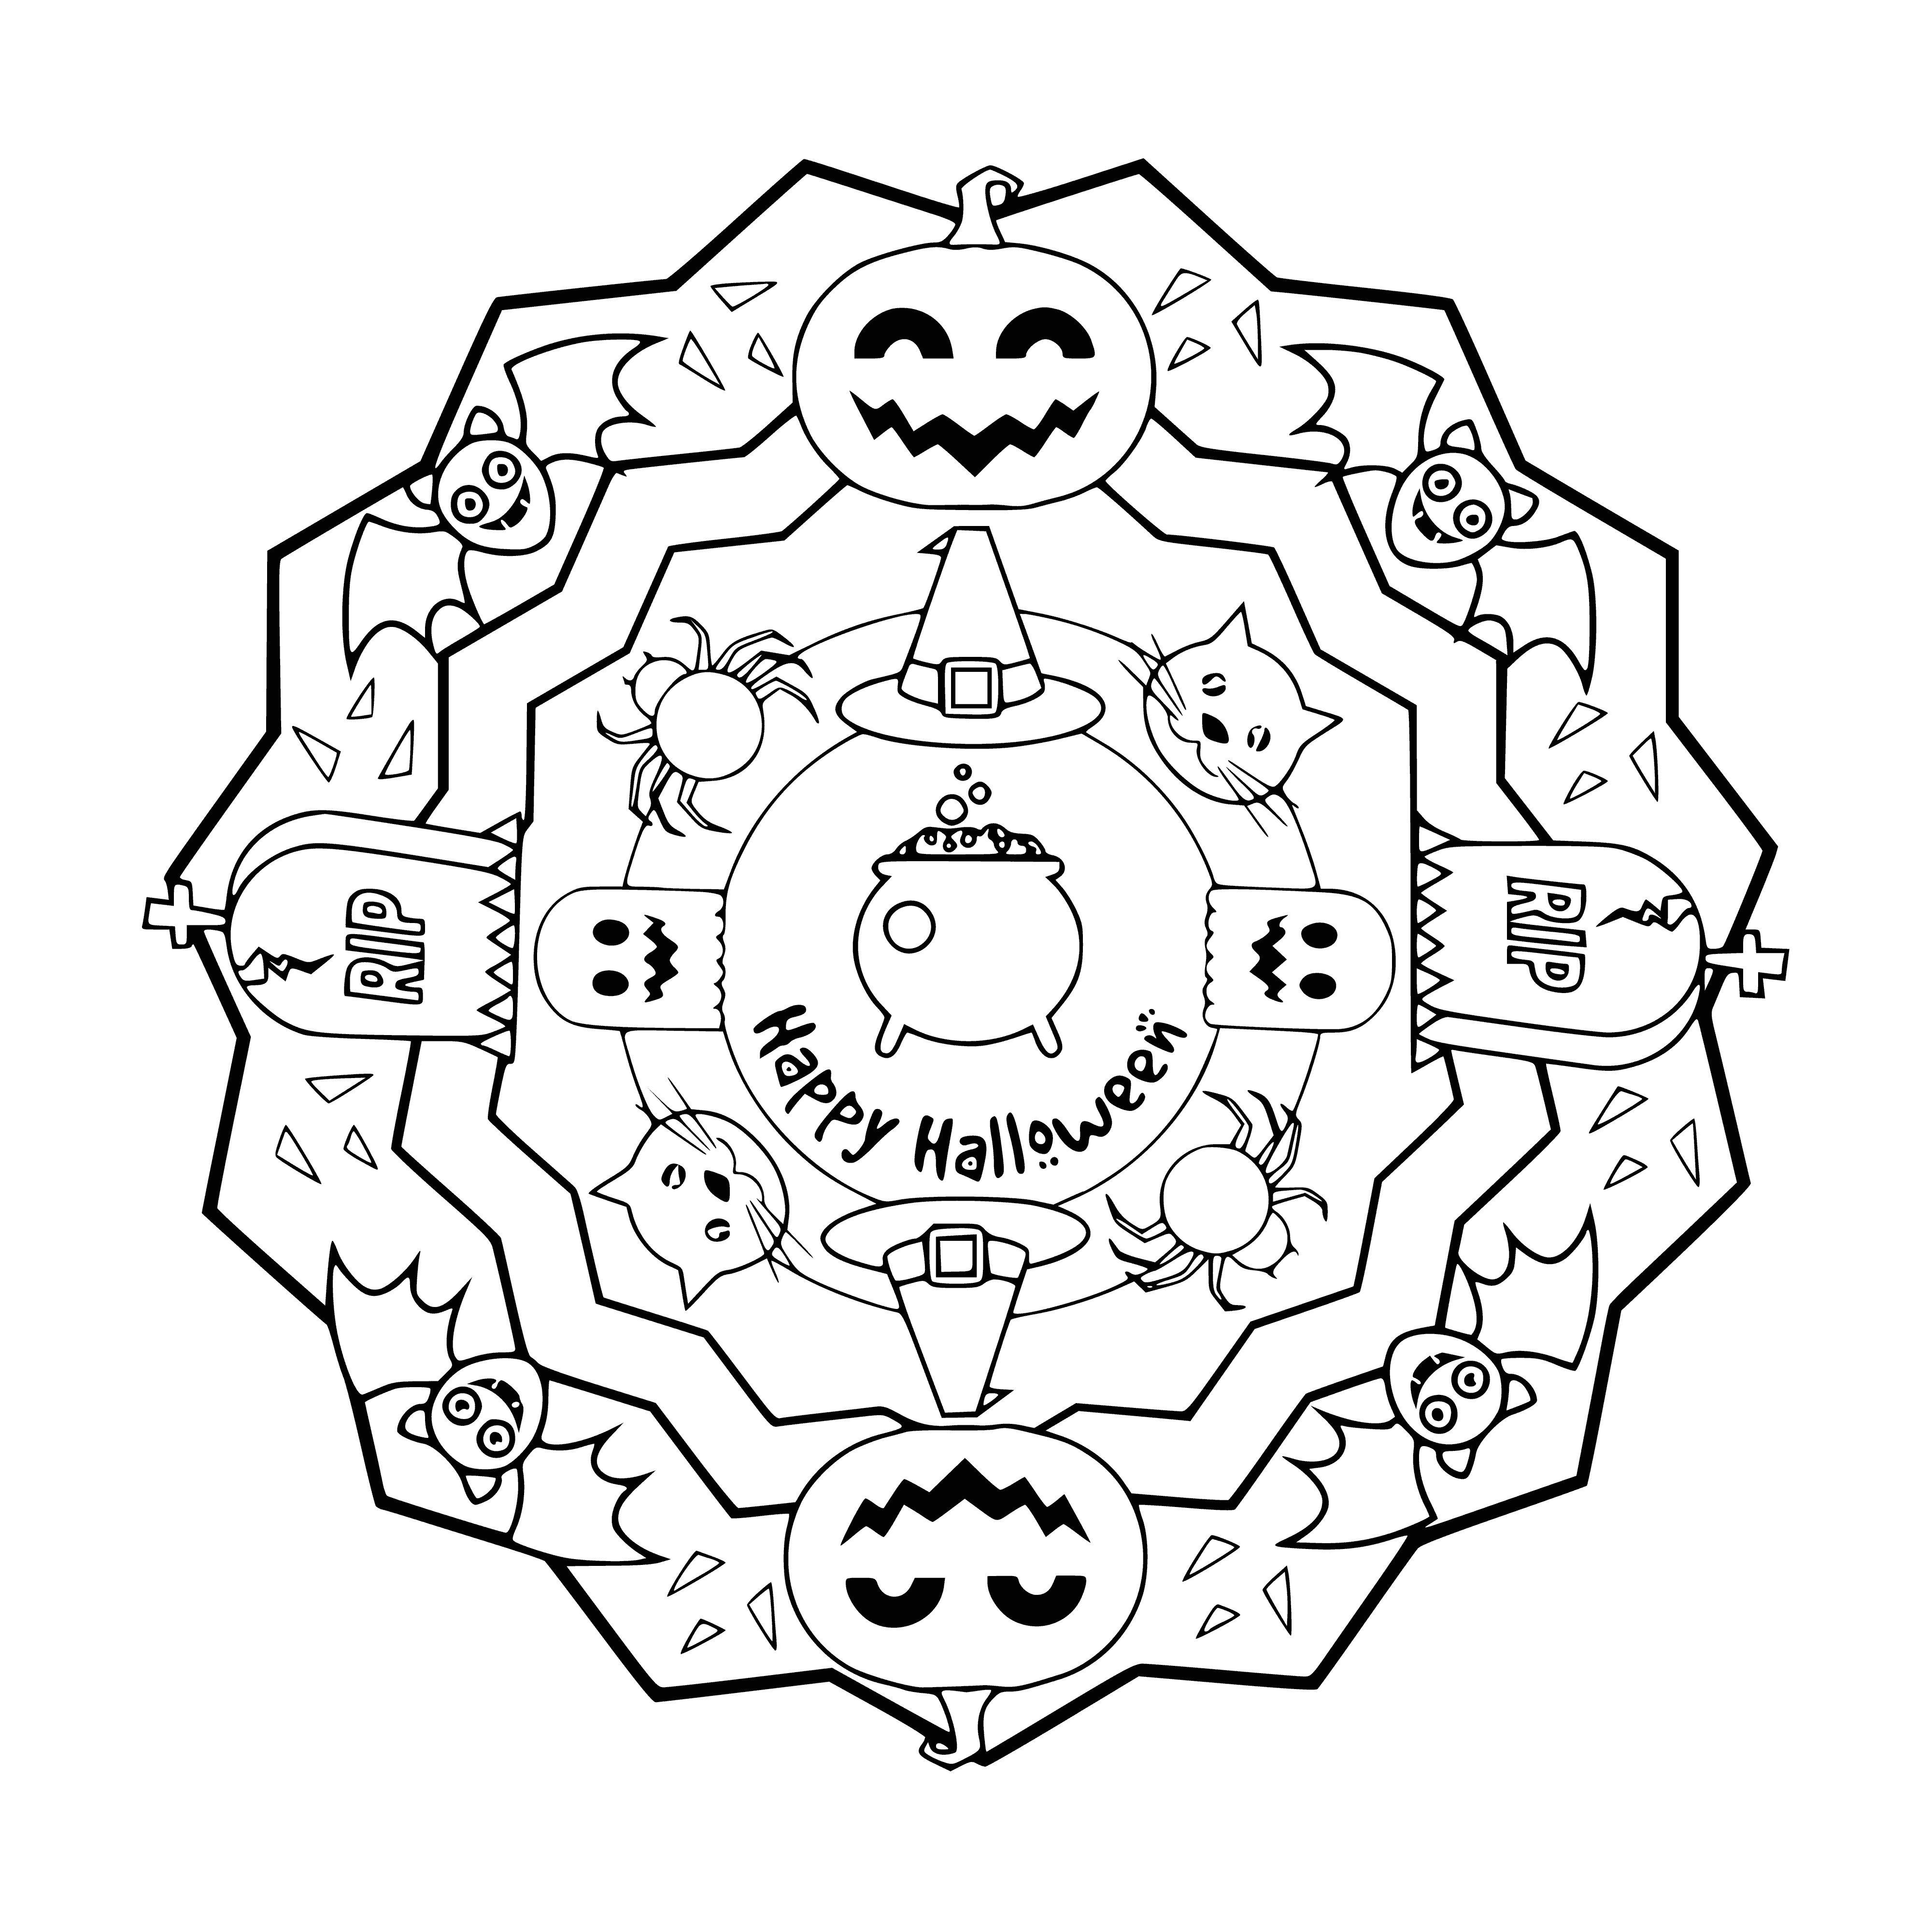 coloring page: Coloring mandalas is a relaxing tool for meditation, self-reflection & inner peace. Pick a design & color it any way you like, focusing on your breath & letting the design bring calm & peace. #meditation #selfcare #mandalas